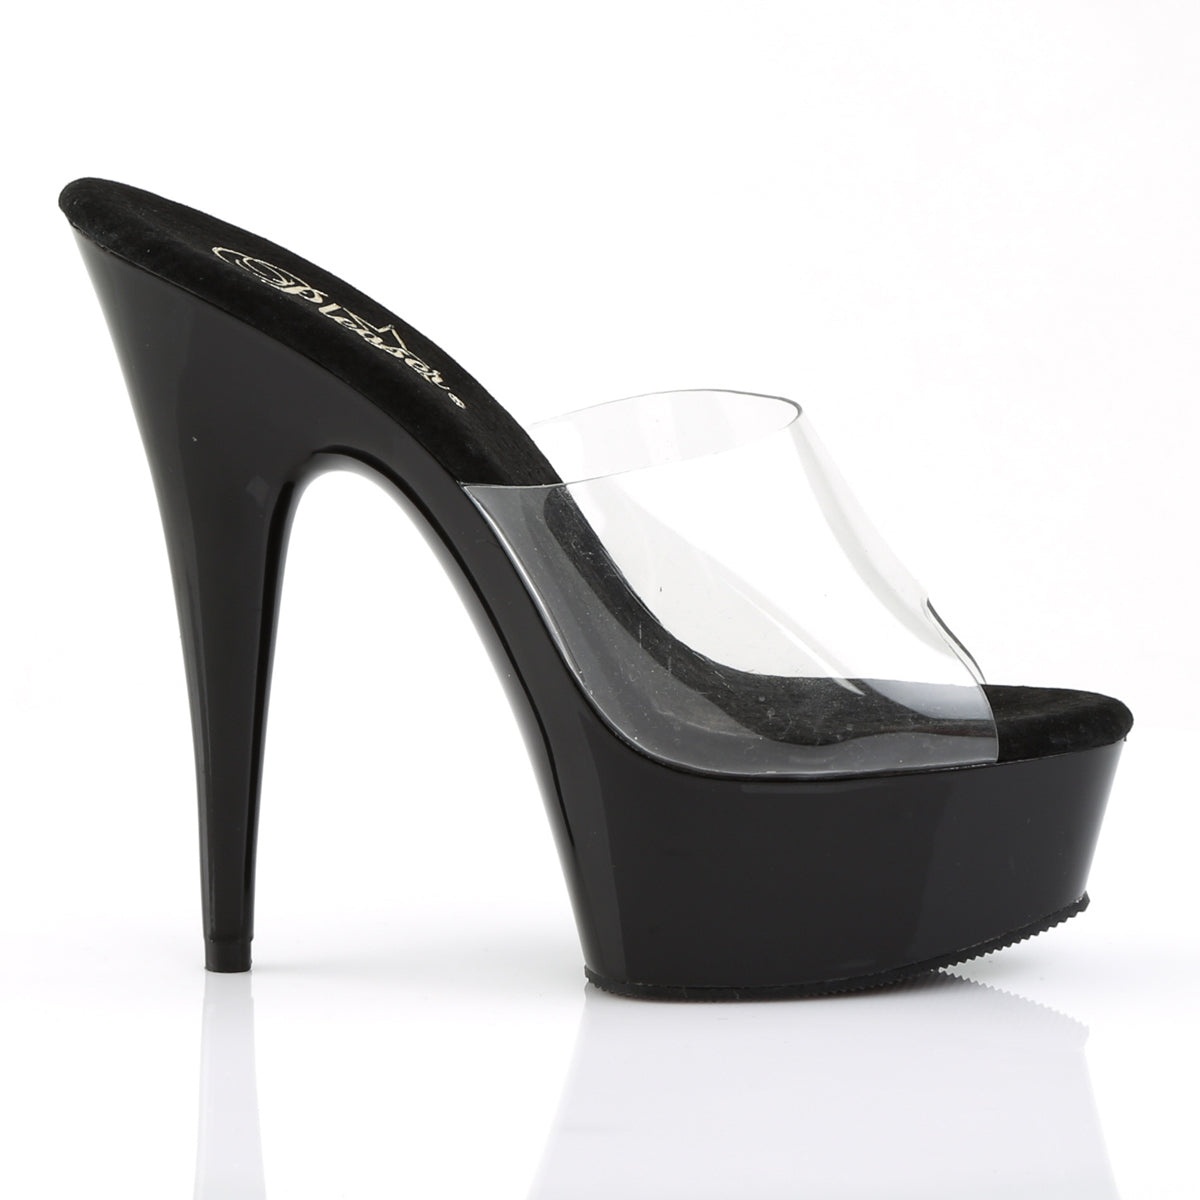 DELIGHT-601 6" Heel Clear and Black Pole Dancing Platforms-Pleaser- Sexy Shoes Fetish Heels